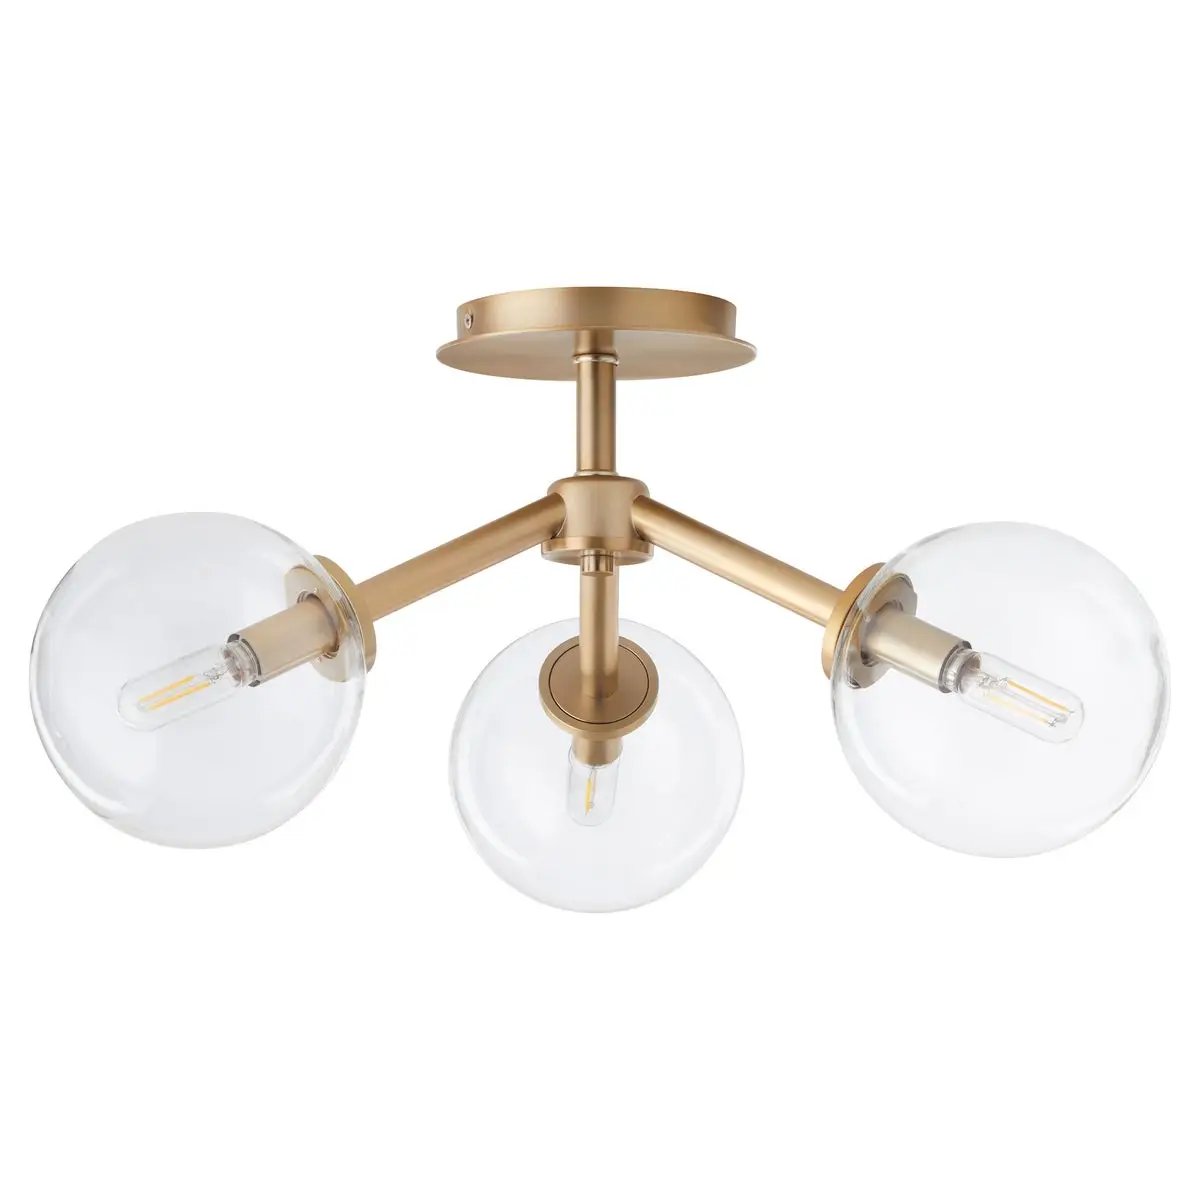 Sputnik Flush Mount Ceiling Light with clear glass globes and aged brass frames. Mid-century modern appeal. 3 bulbs, 60W, dimmable. UL Listed. 21"W x 10.5"H.